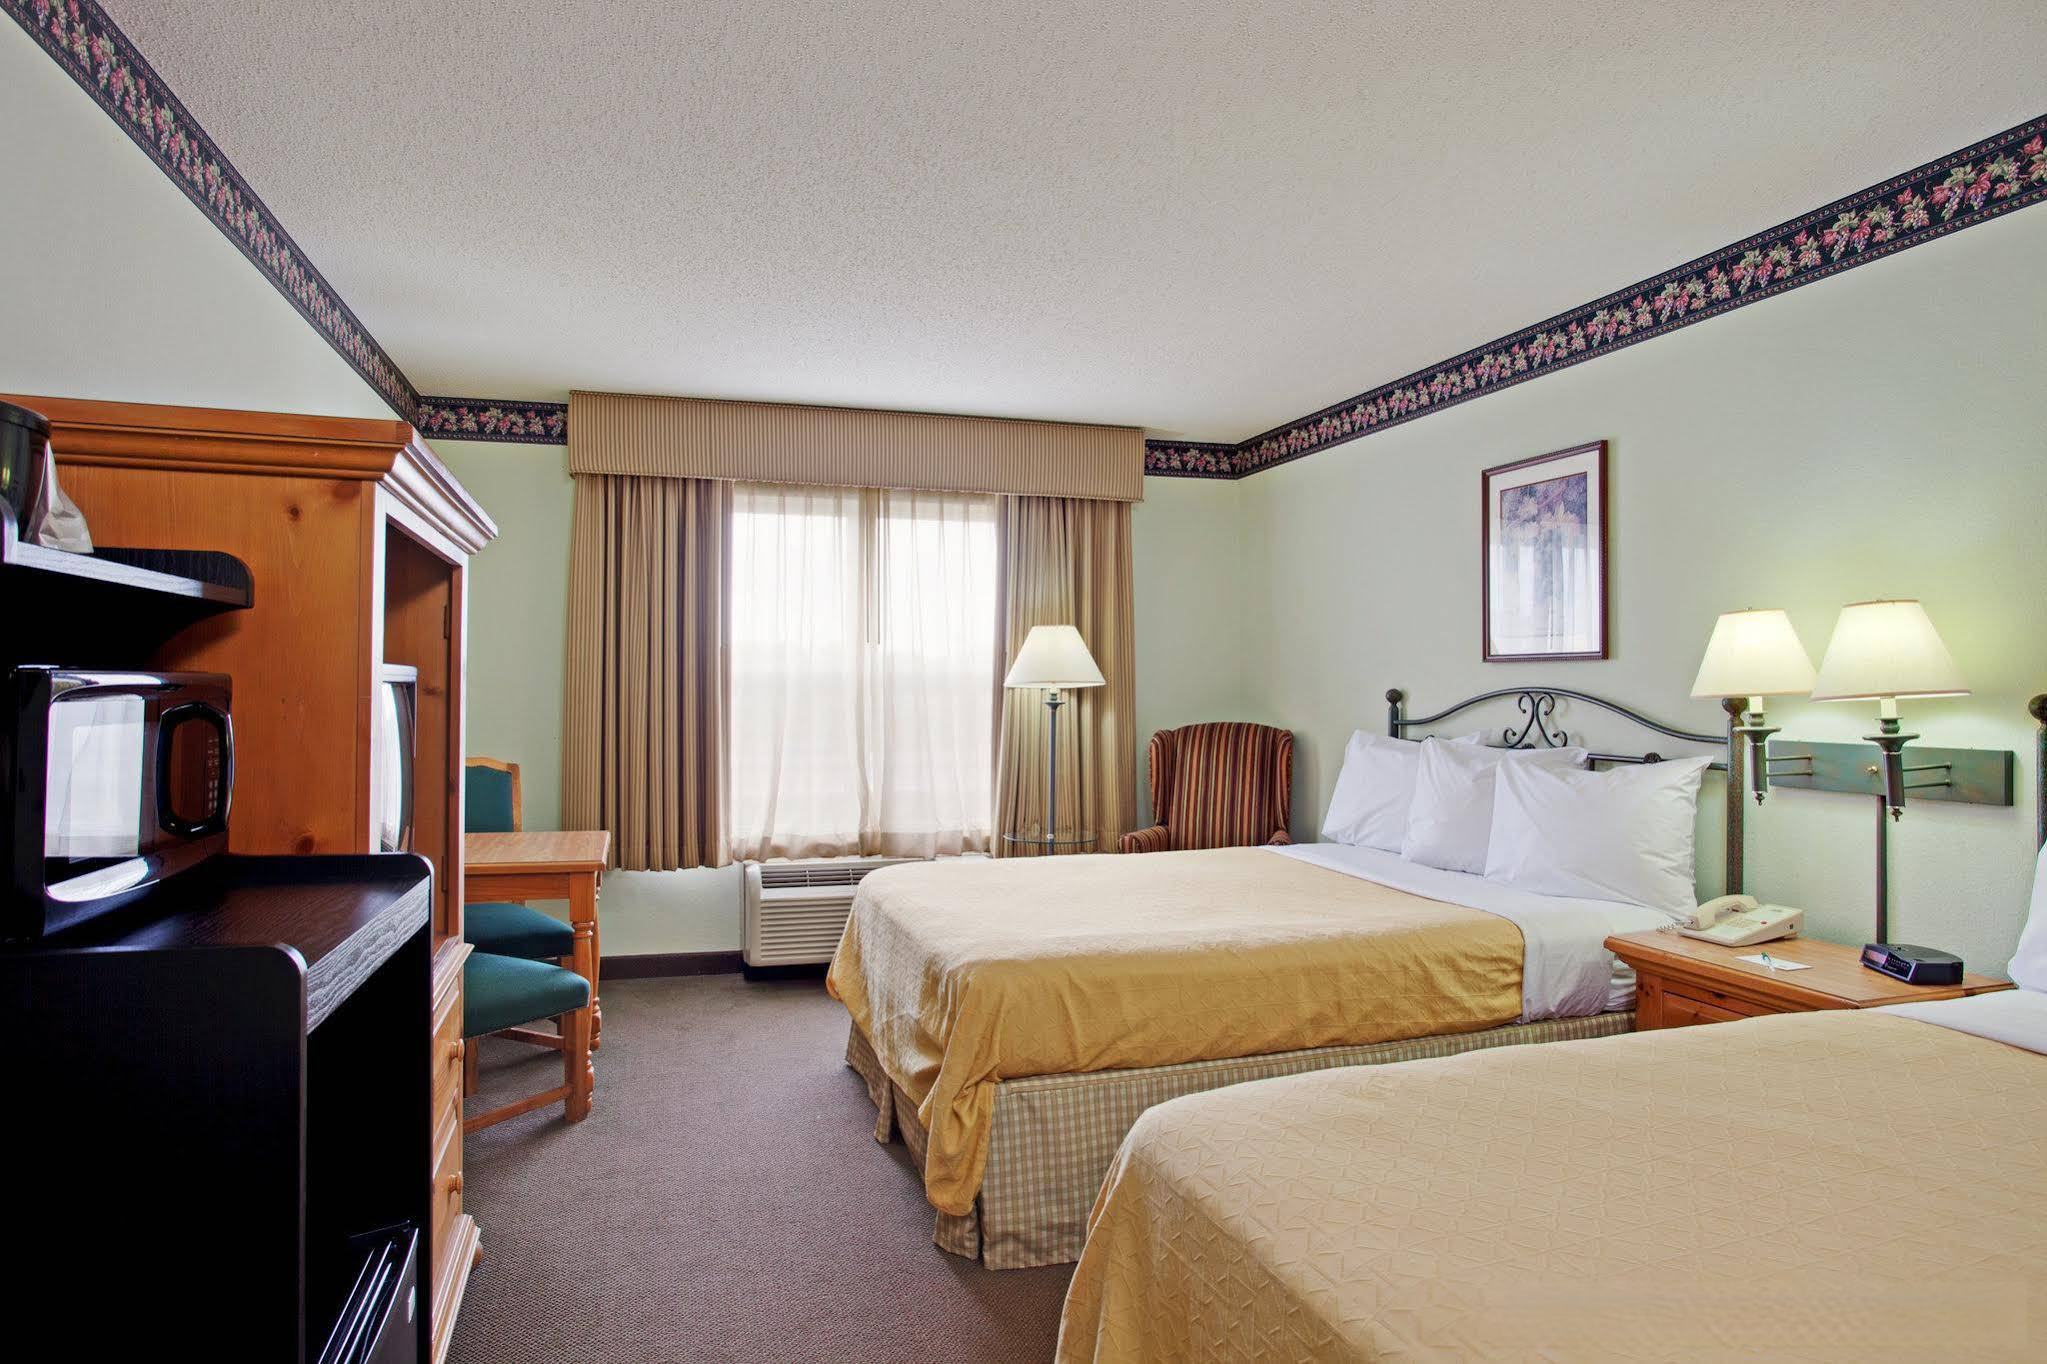 Country Inn & Suites by Radisson, Brooklyn Center, MN